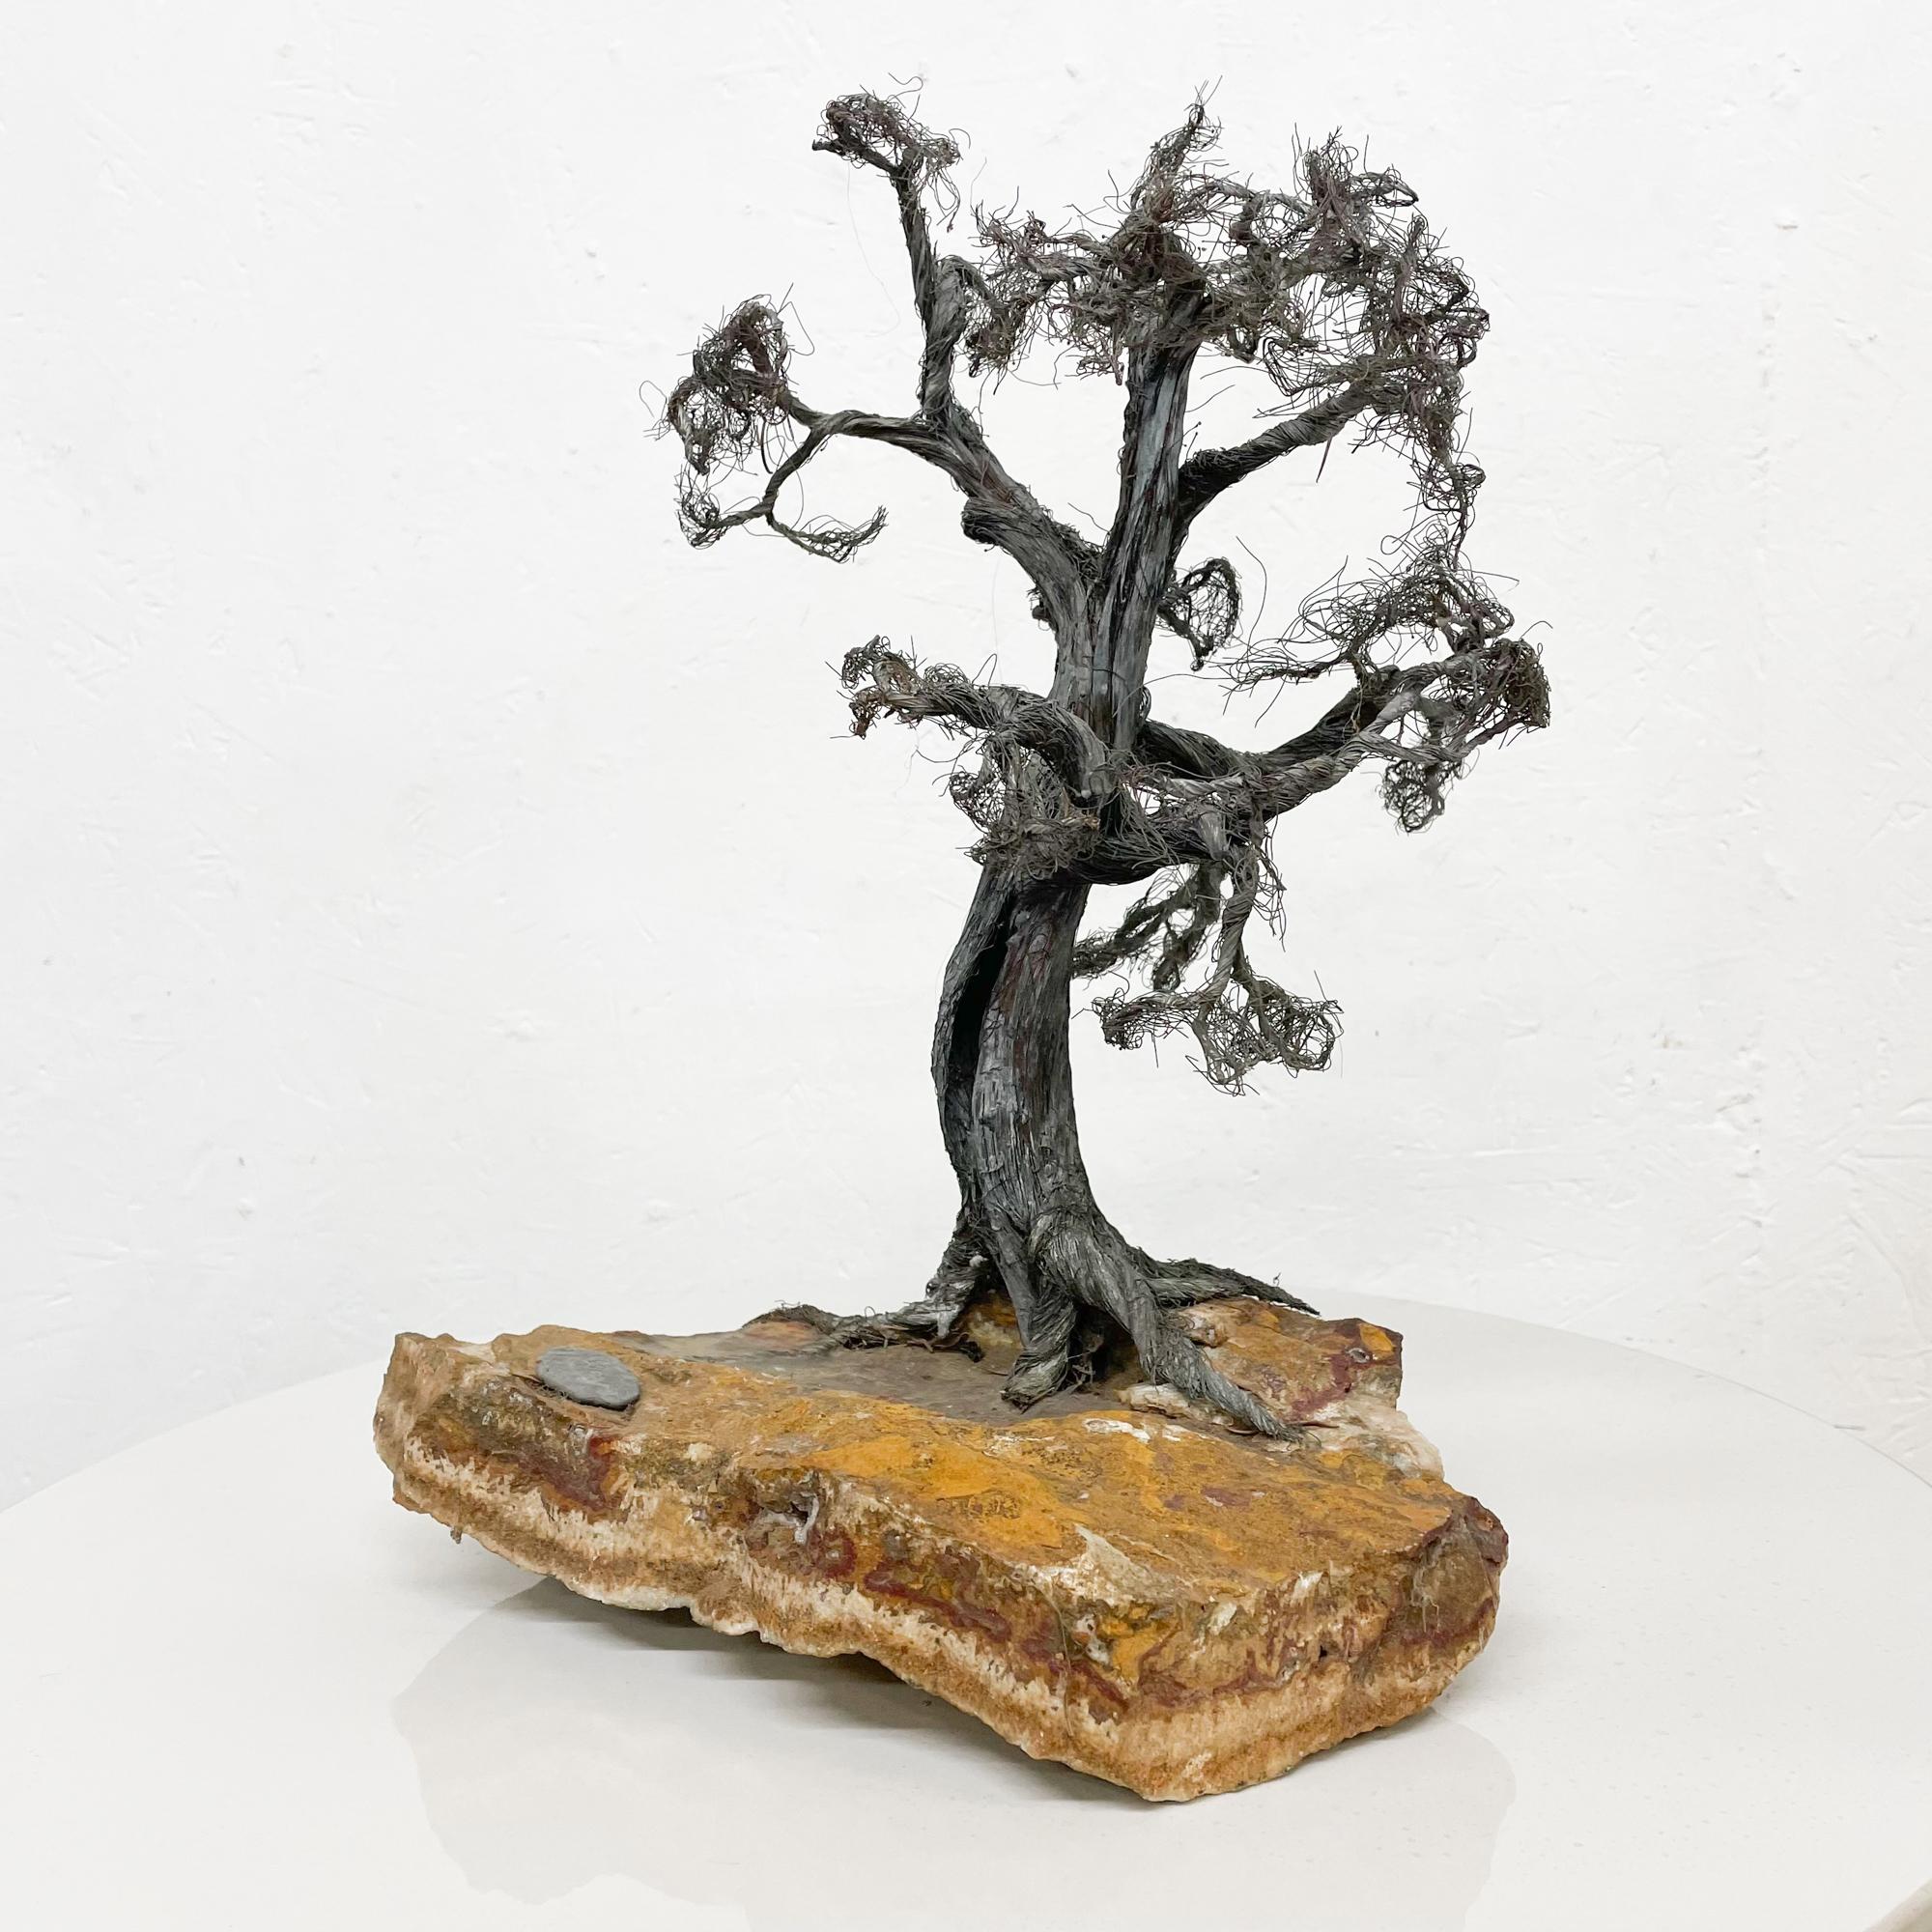 Art Sculpture
Sculptural Raw Edge Botanical Art Bonsai Tree #1
Brown and Gray tones.
Crafted in stainless steel on a raw edge stone base.
Measures: 12 W x 8 D x 16 H inches
Preowned unrestored original vintage condition.
Refer to images.
 